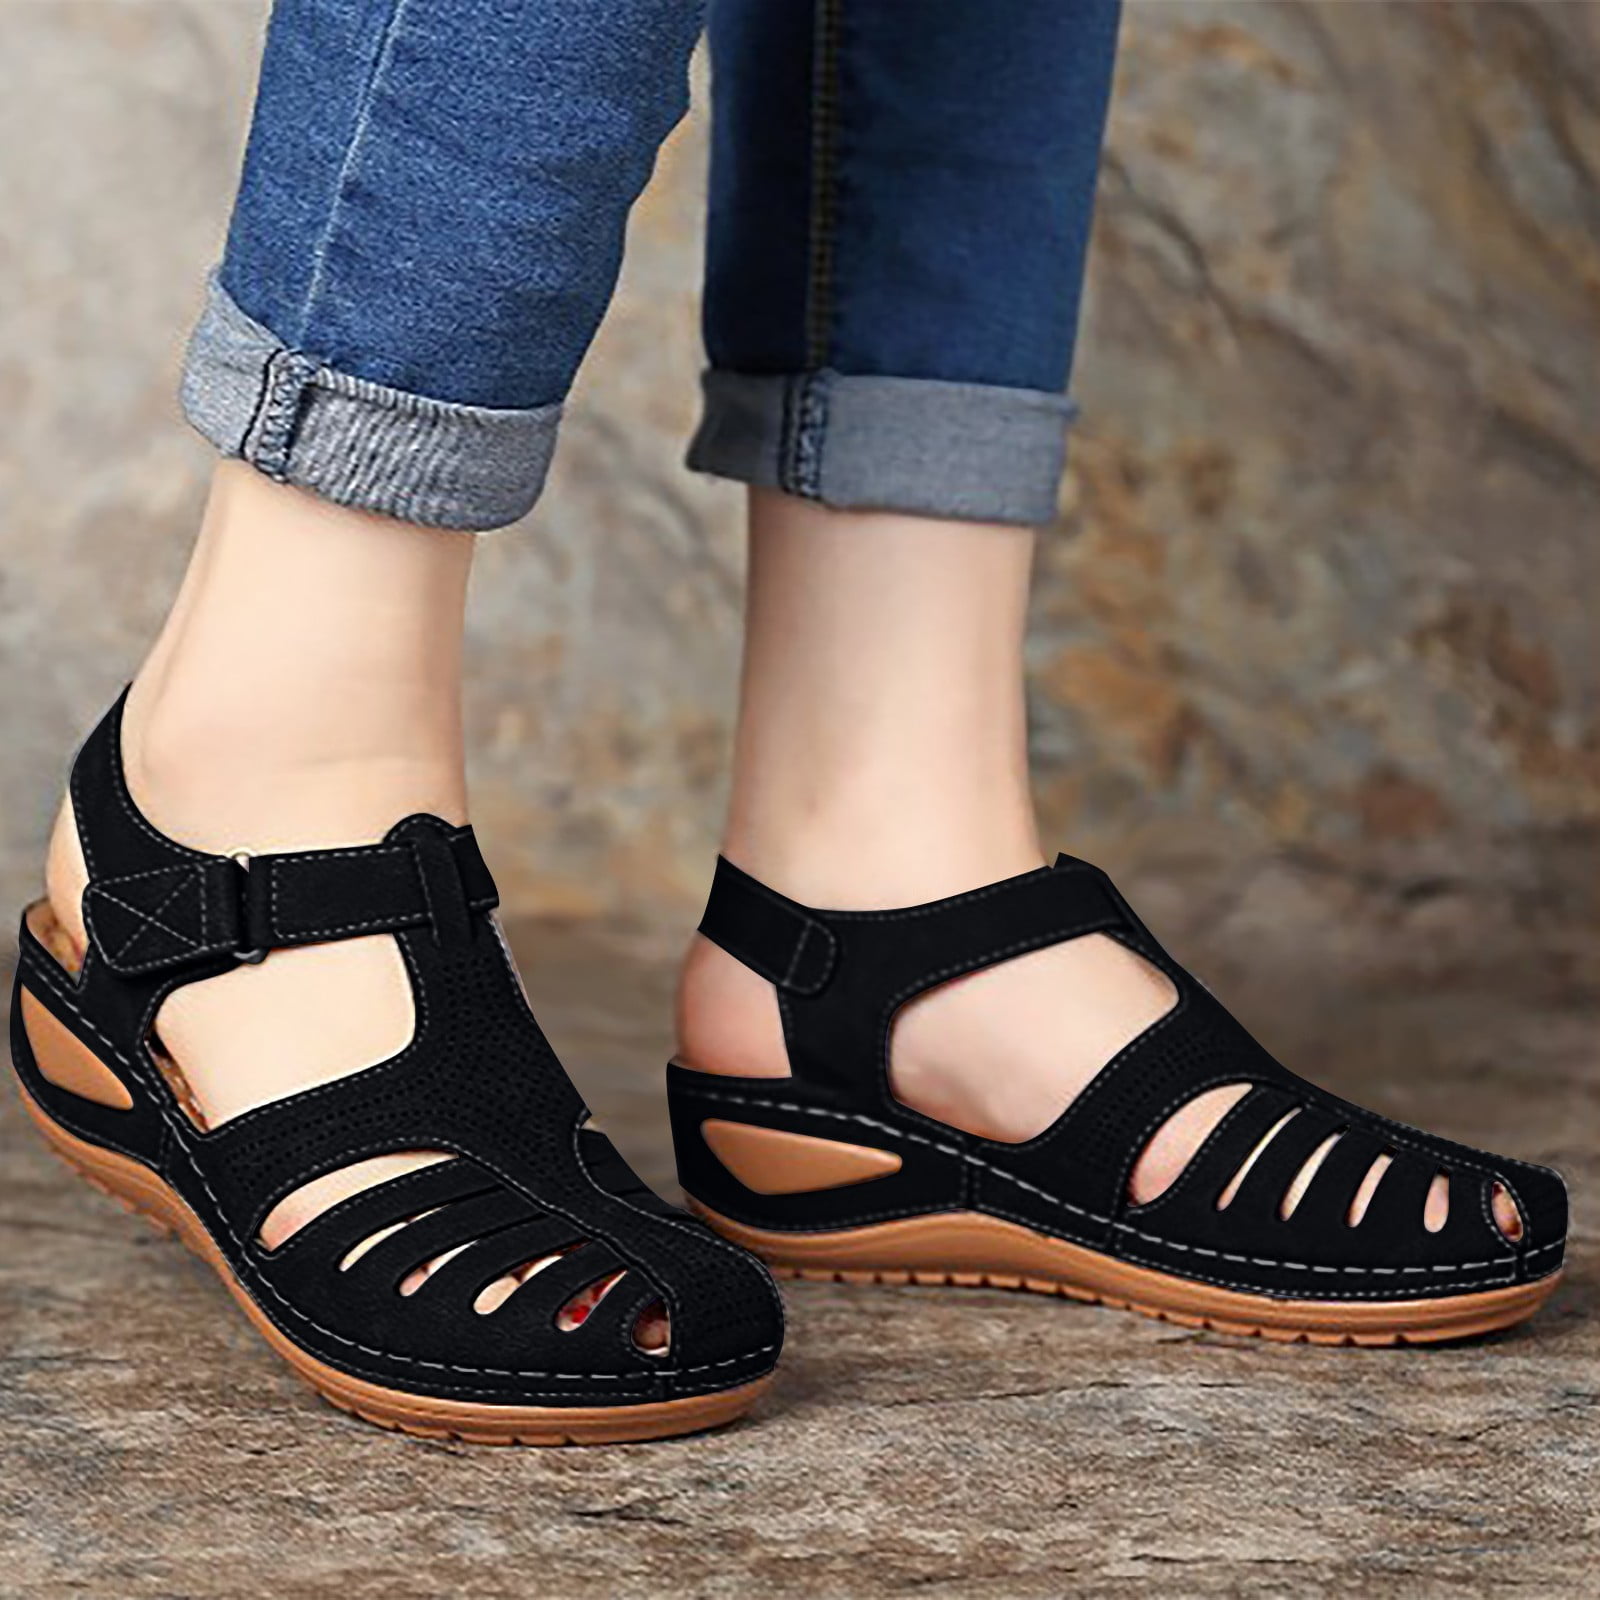 Hvyesh Closed Toe Sandals Women Orthopedic Wedge Sandals Hollow Out ...